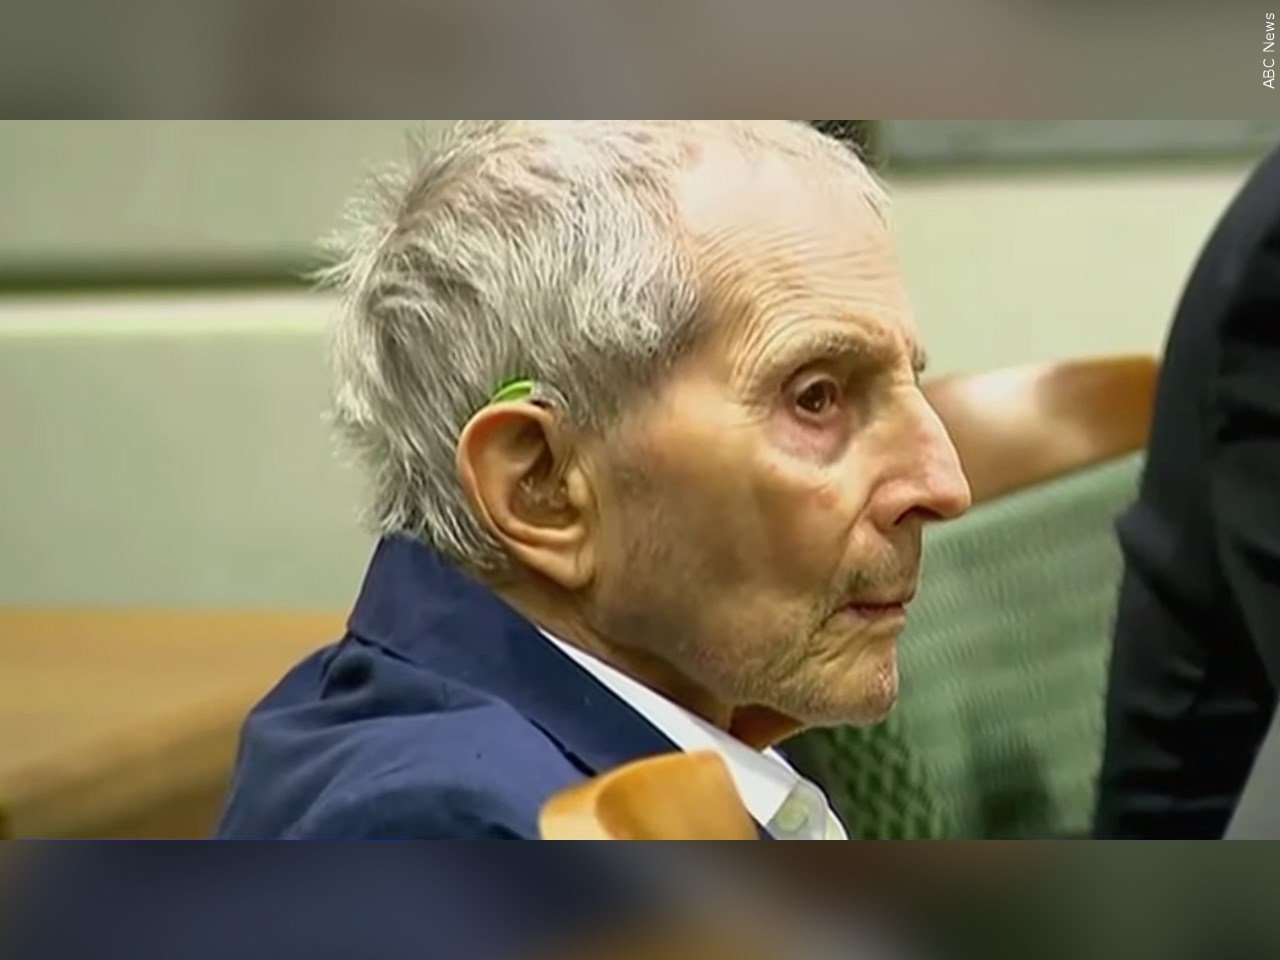 Robert Durst hospitalized with COVID-19, his lawyer says - WBBJ TV - WBBJ-TV